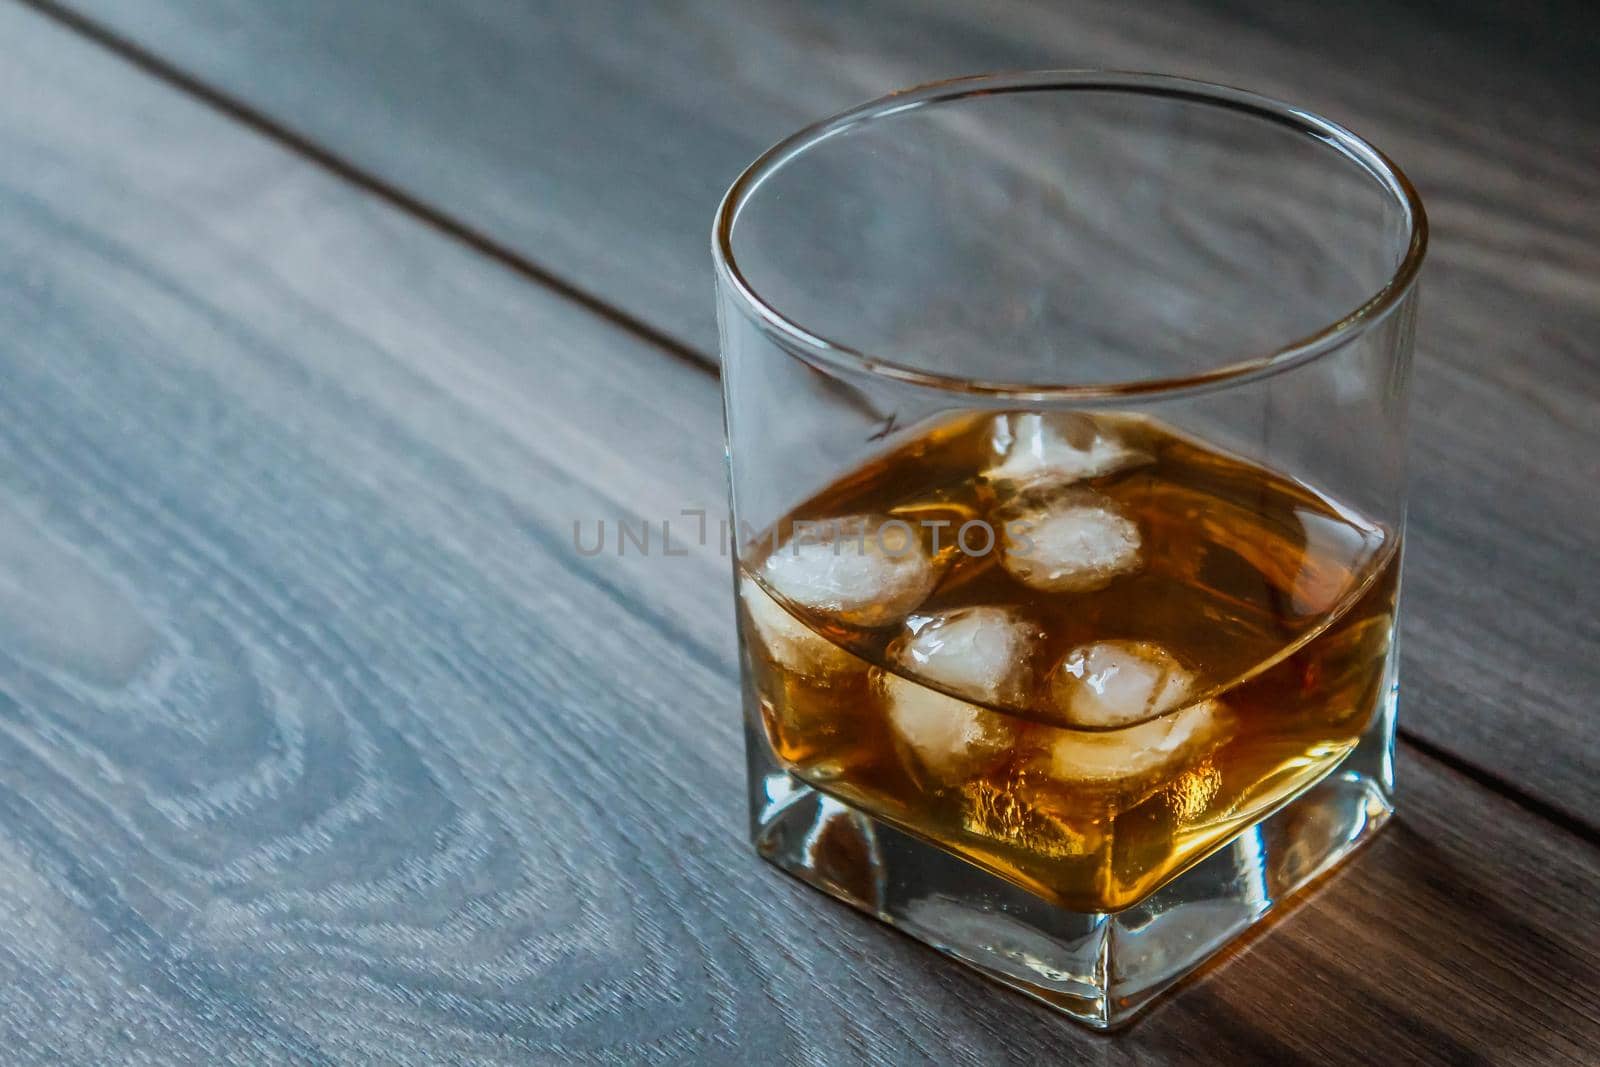 Glass with whiskey and ice cubes on a wooden background